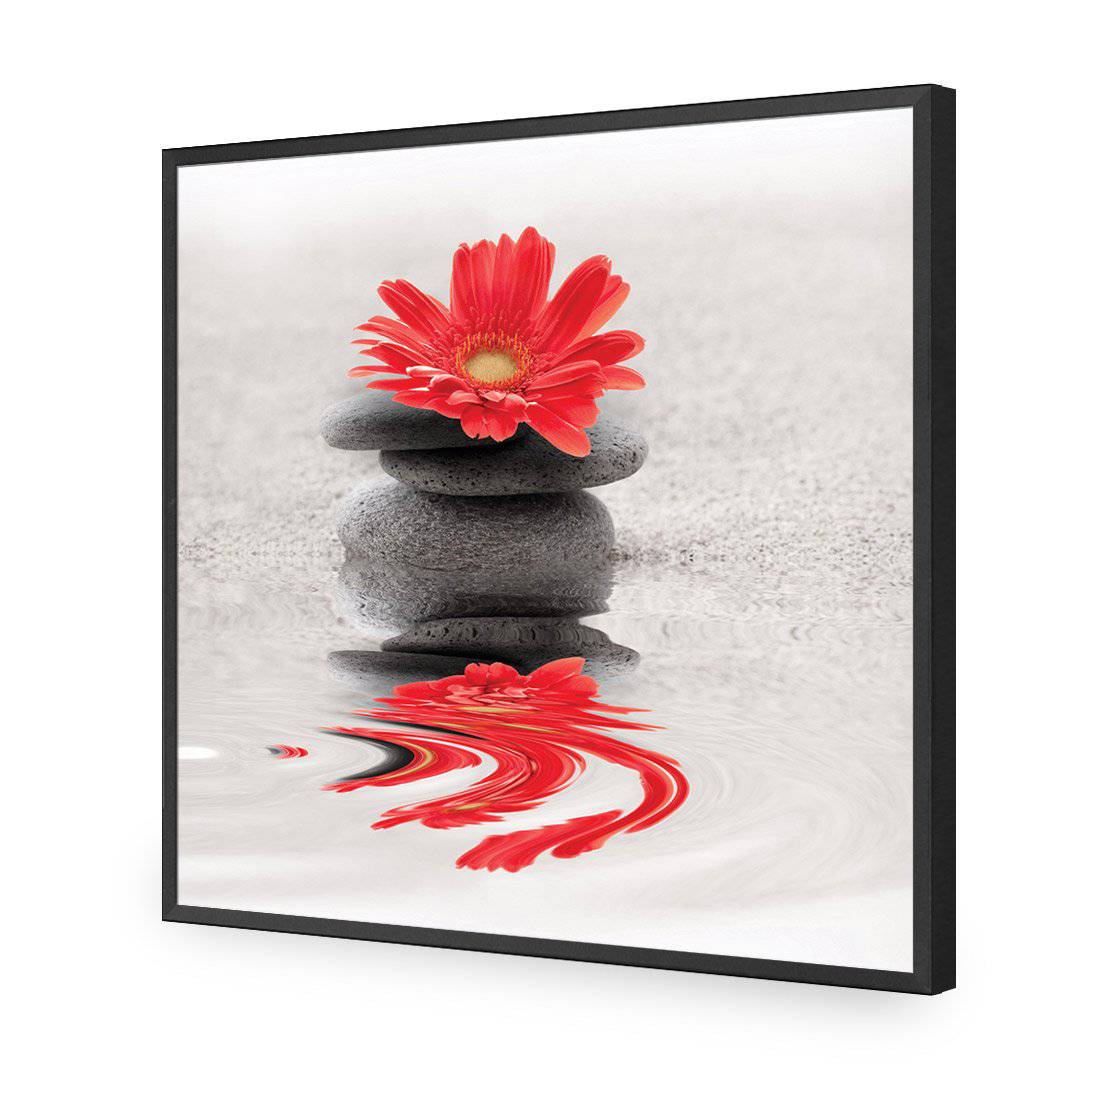 Red Flower Reflection, Square-Acrylic-Wall Art Design-Without Border-Acrylic - Black Frame-37x37cm-Wall Art Designs